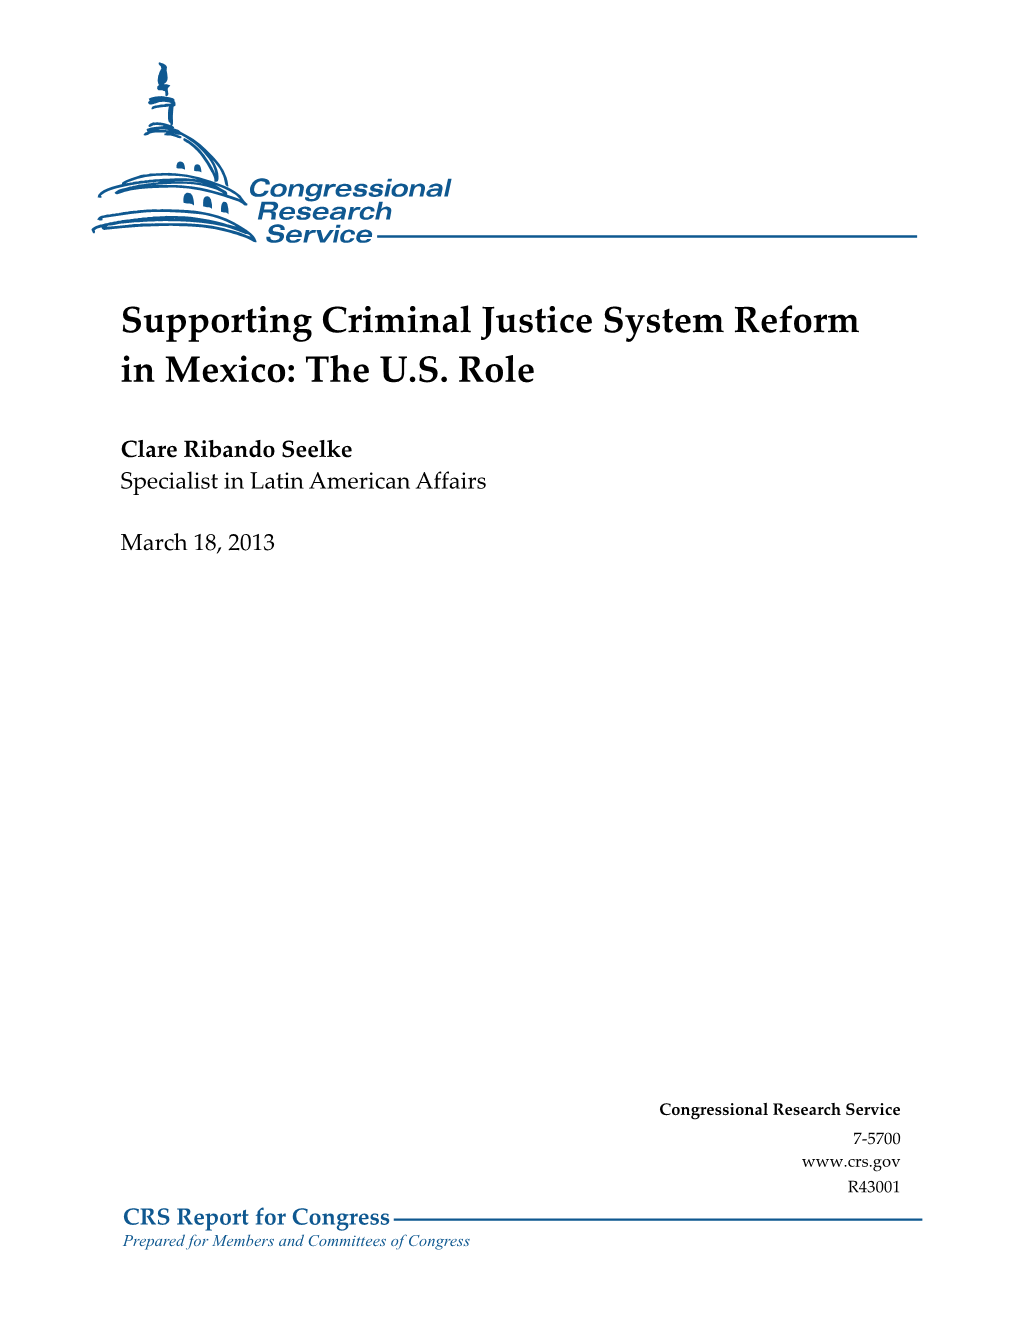 Supporting Criminal Justice System Reform in Mexico: the U.S